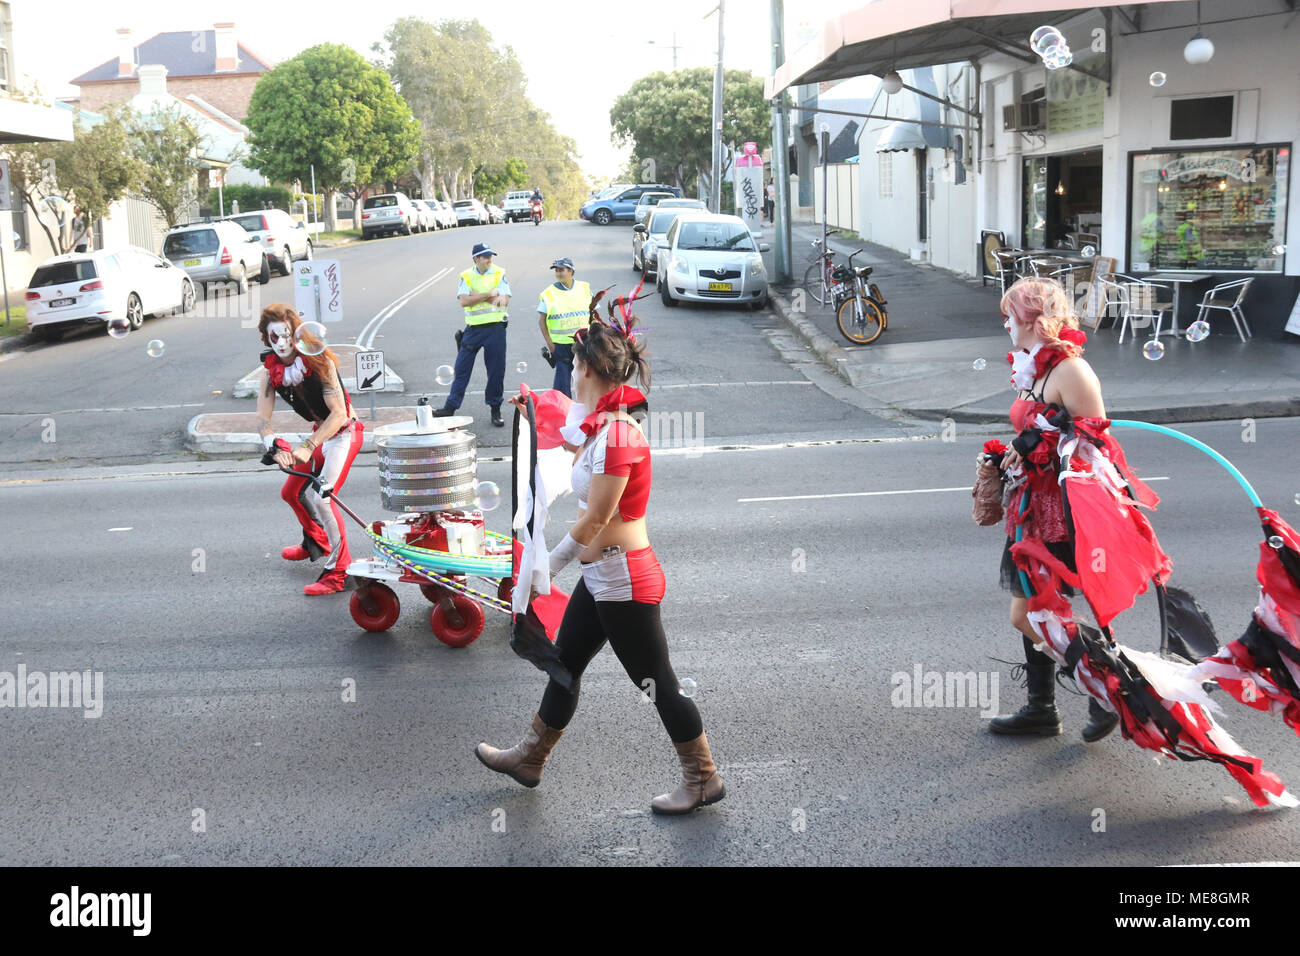 Sydney, Australia. 22 April 2018. Reclaim the Streets organised the street dance party, which started at The Hub, Newtown and made its way along King Street via the George Michael mural in Erskineville and ended up in Sydney Park, St Peters. This is the third annual event, the first one being on 23 April 2016 following an assault on a man in Newtown who was wearing a dress. Credit: Richard Milnes/Alamy Live News Stock Photo